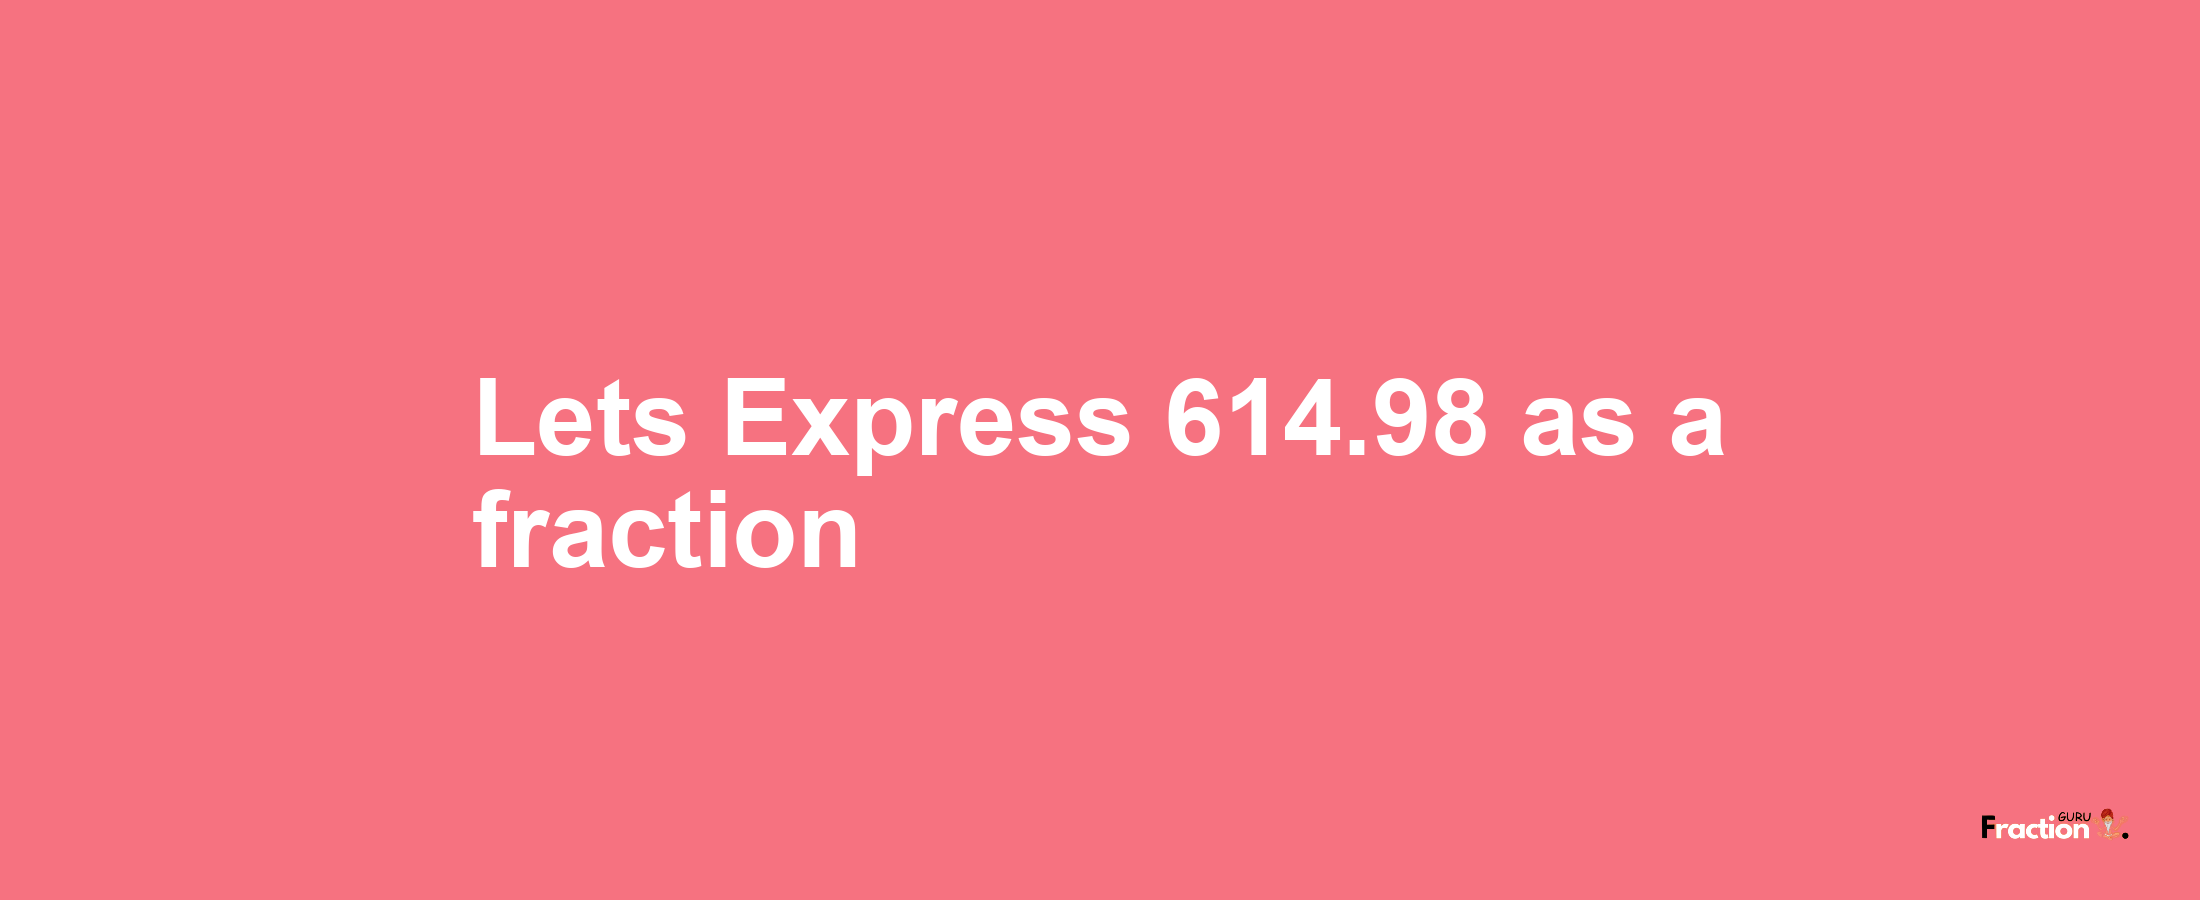 Lets Express 614.98 as afraction